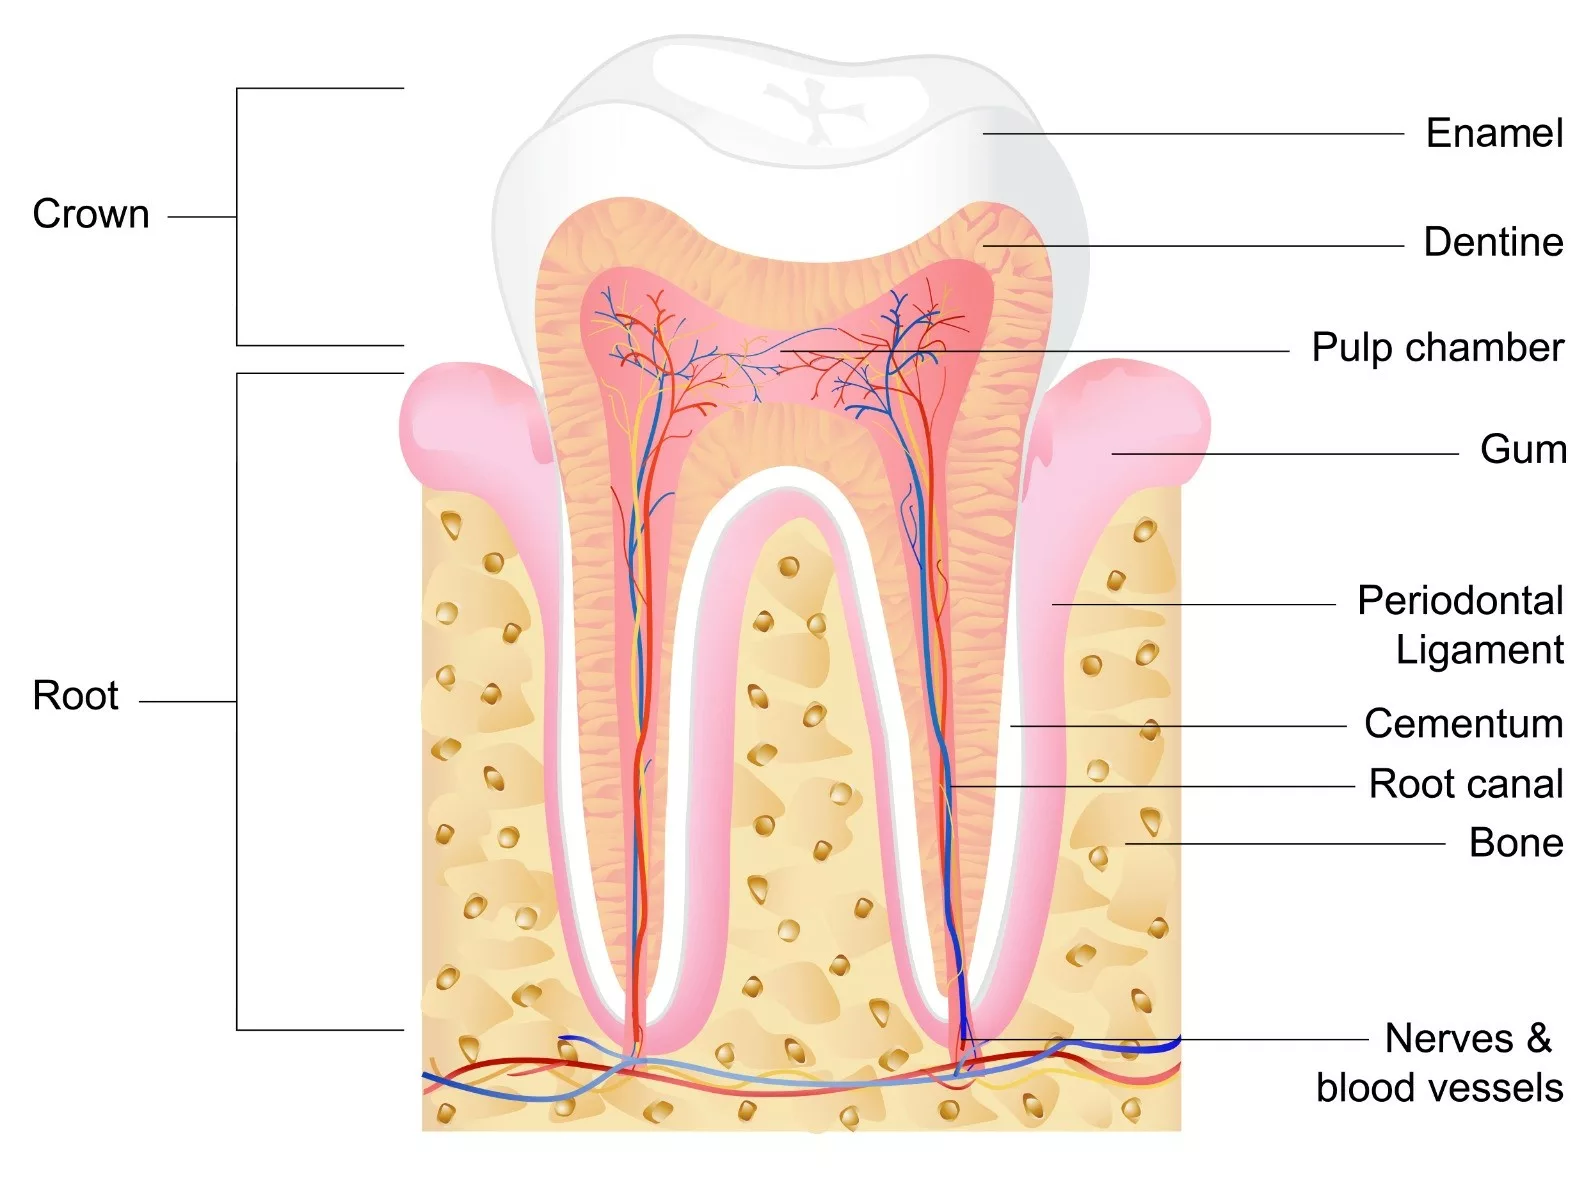 Image of the anatomical structure of a tooth